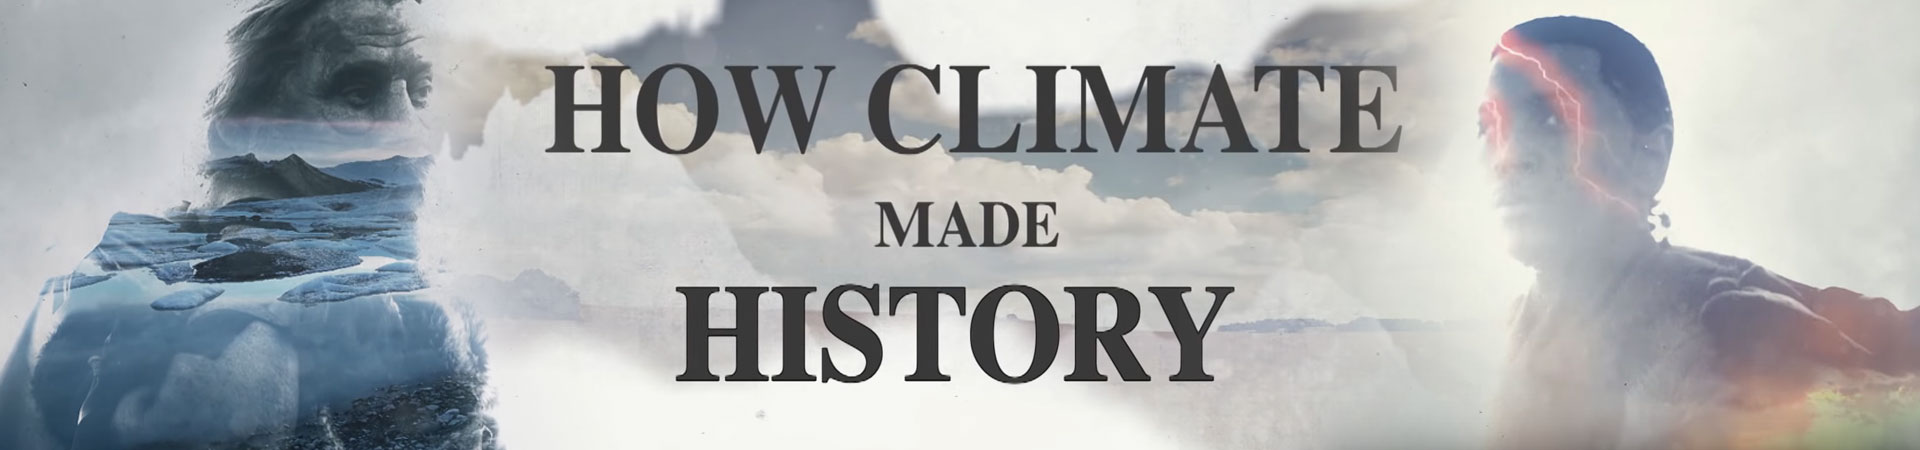 How Climate Made History